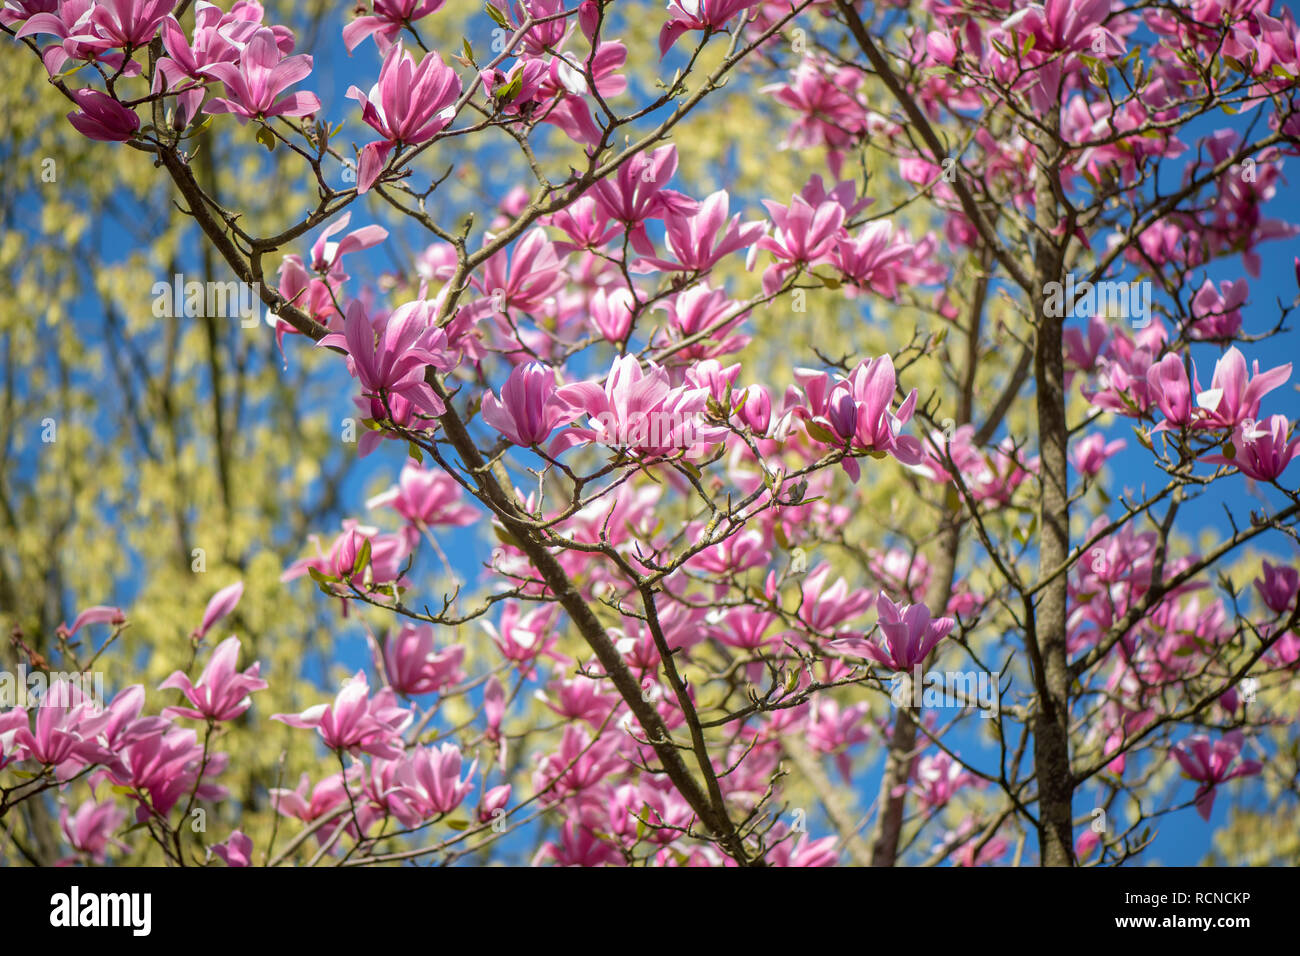 The beautiful vibrant pink flowers of the spring flowering Magnolia 'Spectrum' against a bright blue sky Stock Photo